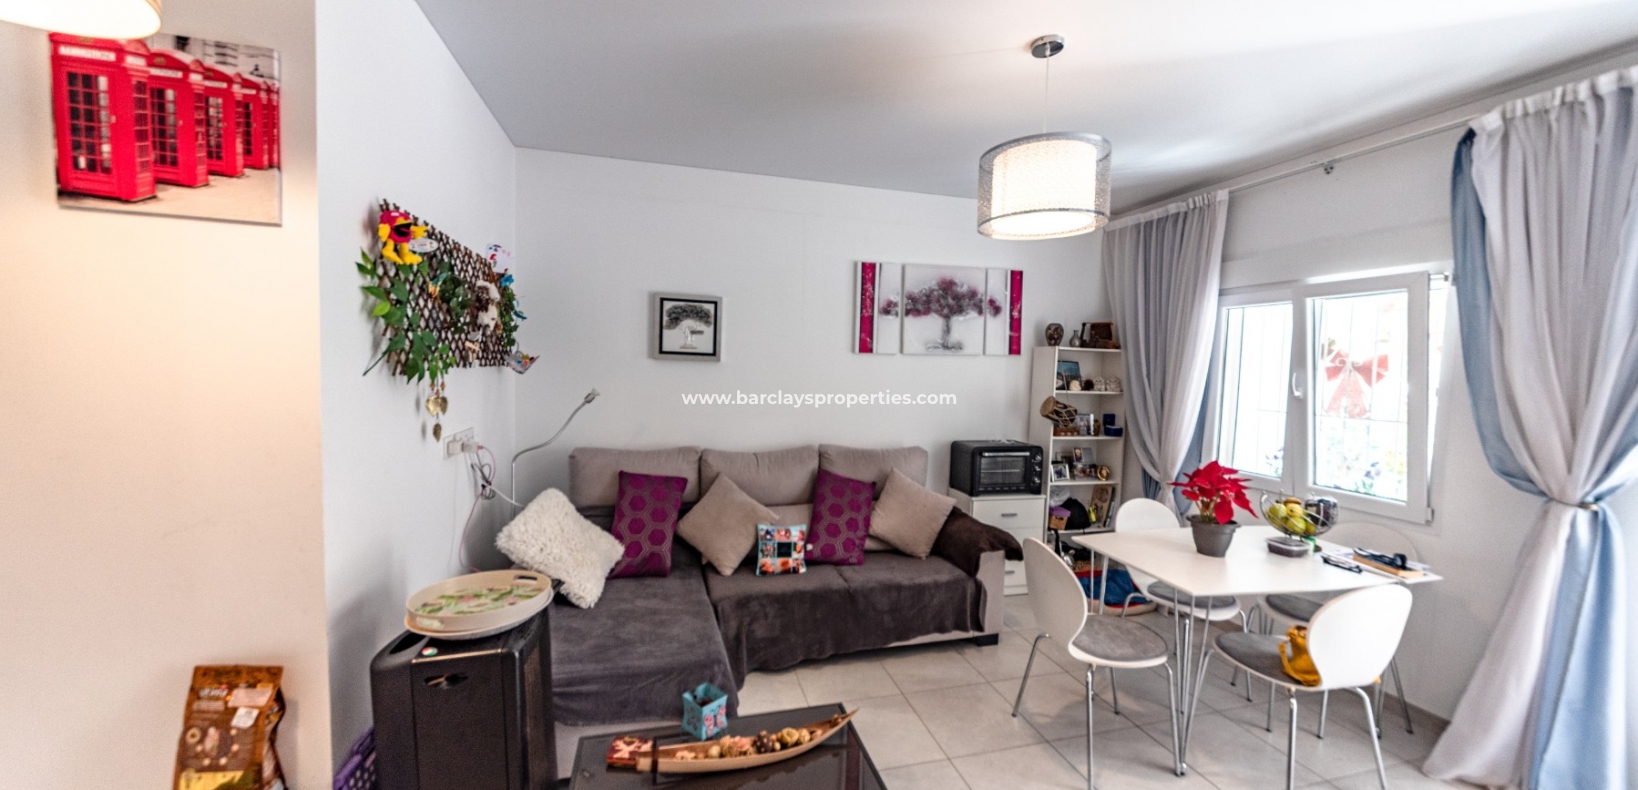 Living Room - Terraced Property For Sale In La Marina